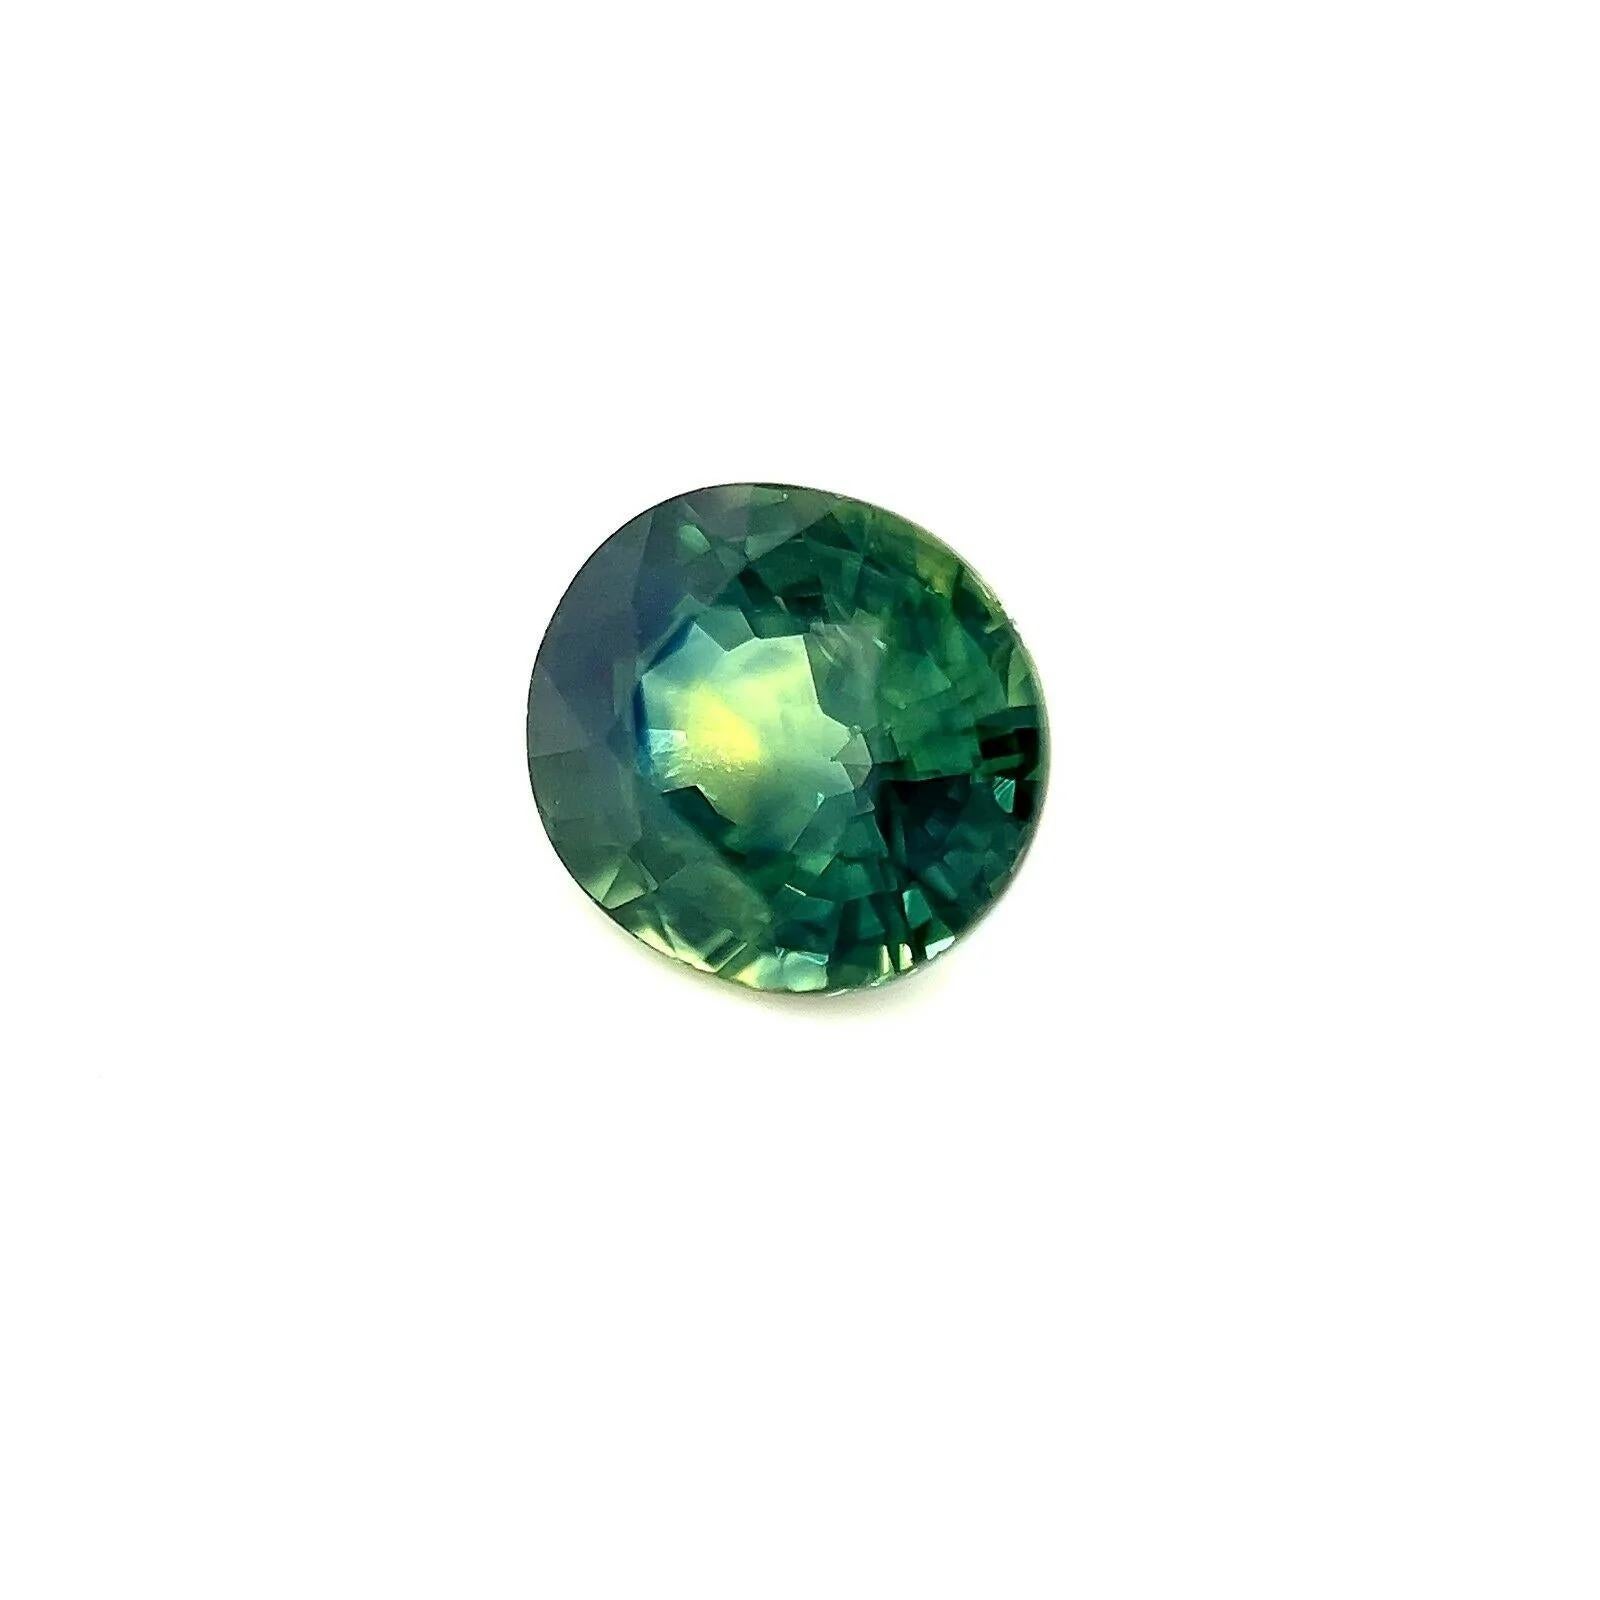 1.36ct Blue Green Teal Yellow Australian Sapphire Oval Cut Rare Gem 6x6.5mm

Natural Green Blue Australian Sapphire Gemstone.
1.36 Carat with a beautiful and unique exhibition of colour, predominately an exquisite green blue ‘Teal’ colour and